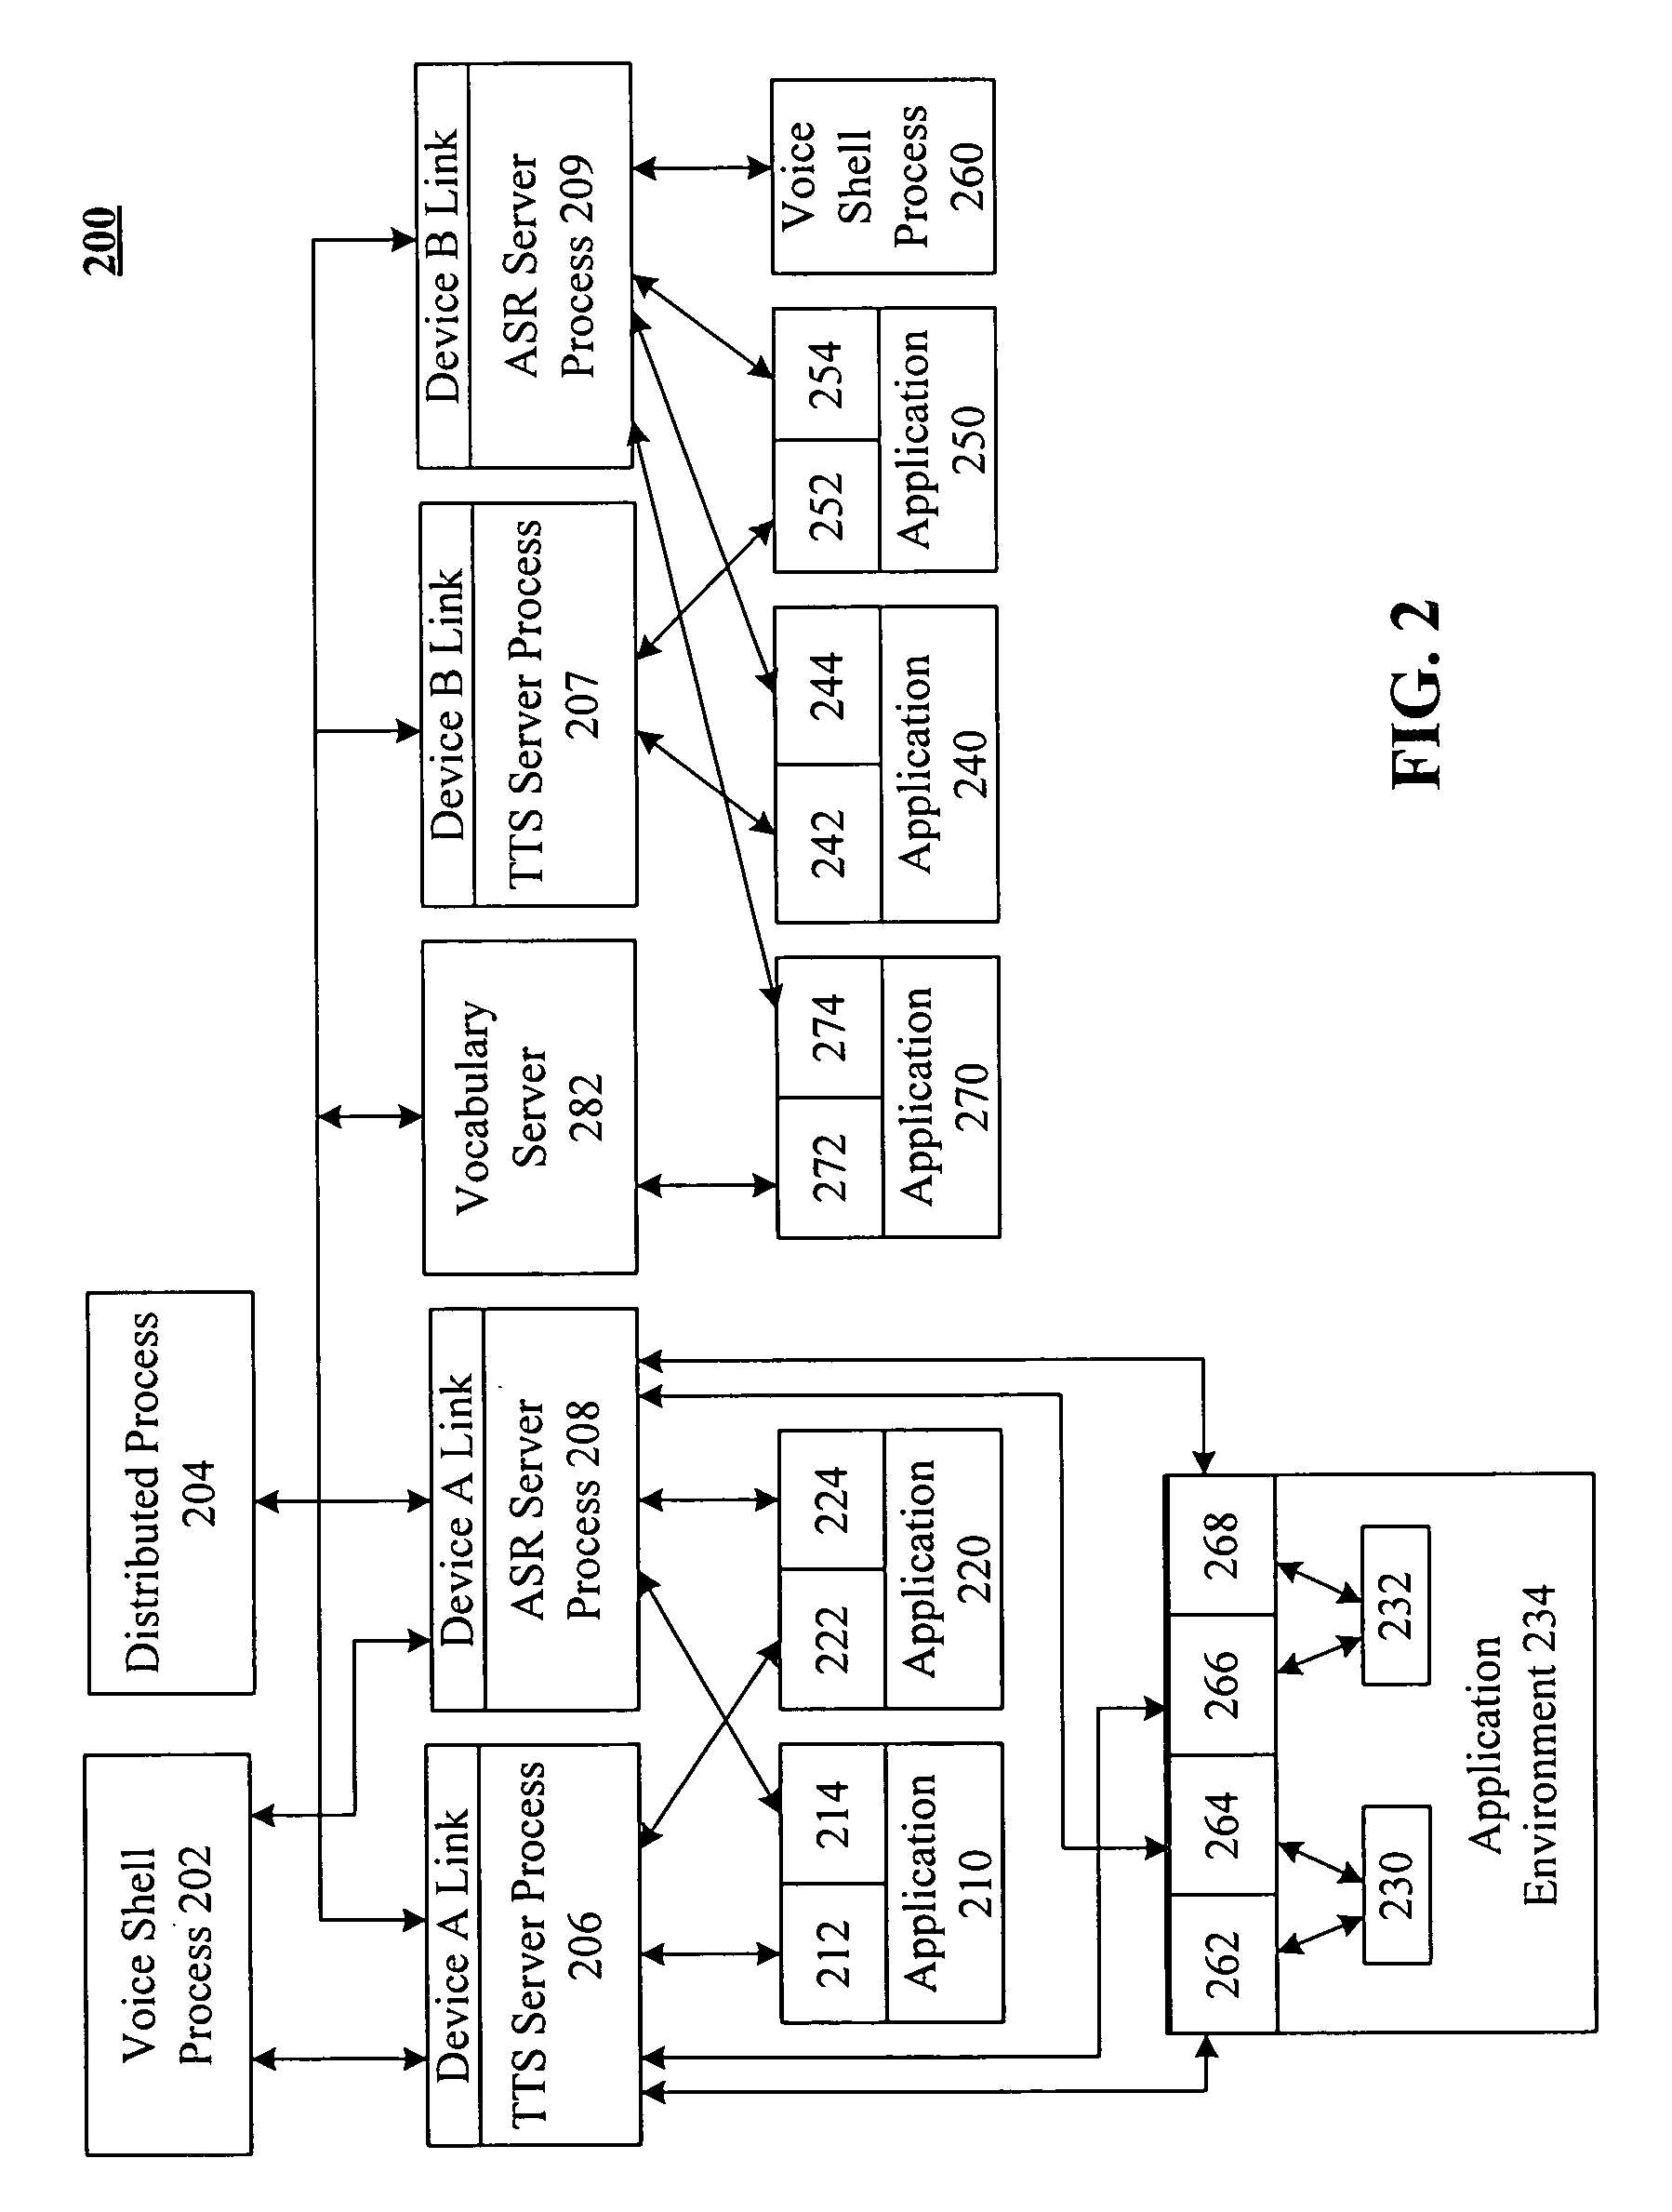 Supporting multiple speech enabled user interface consoles within a motor vehicle